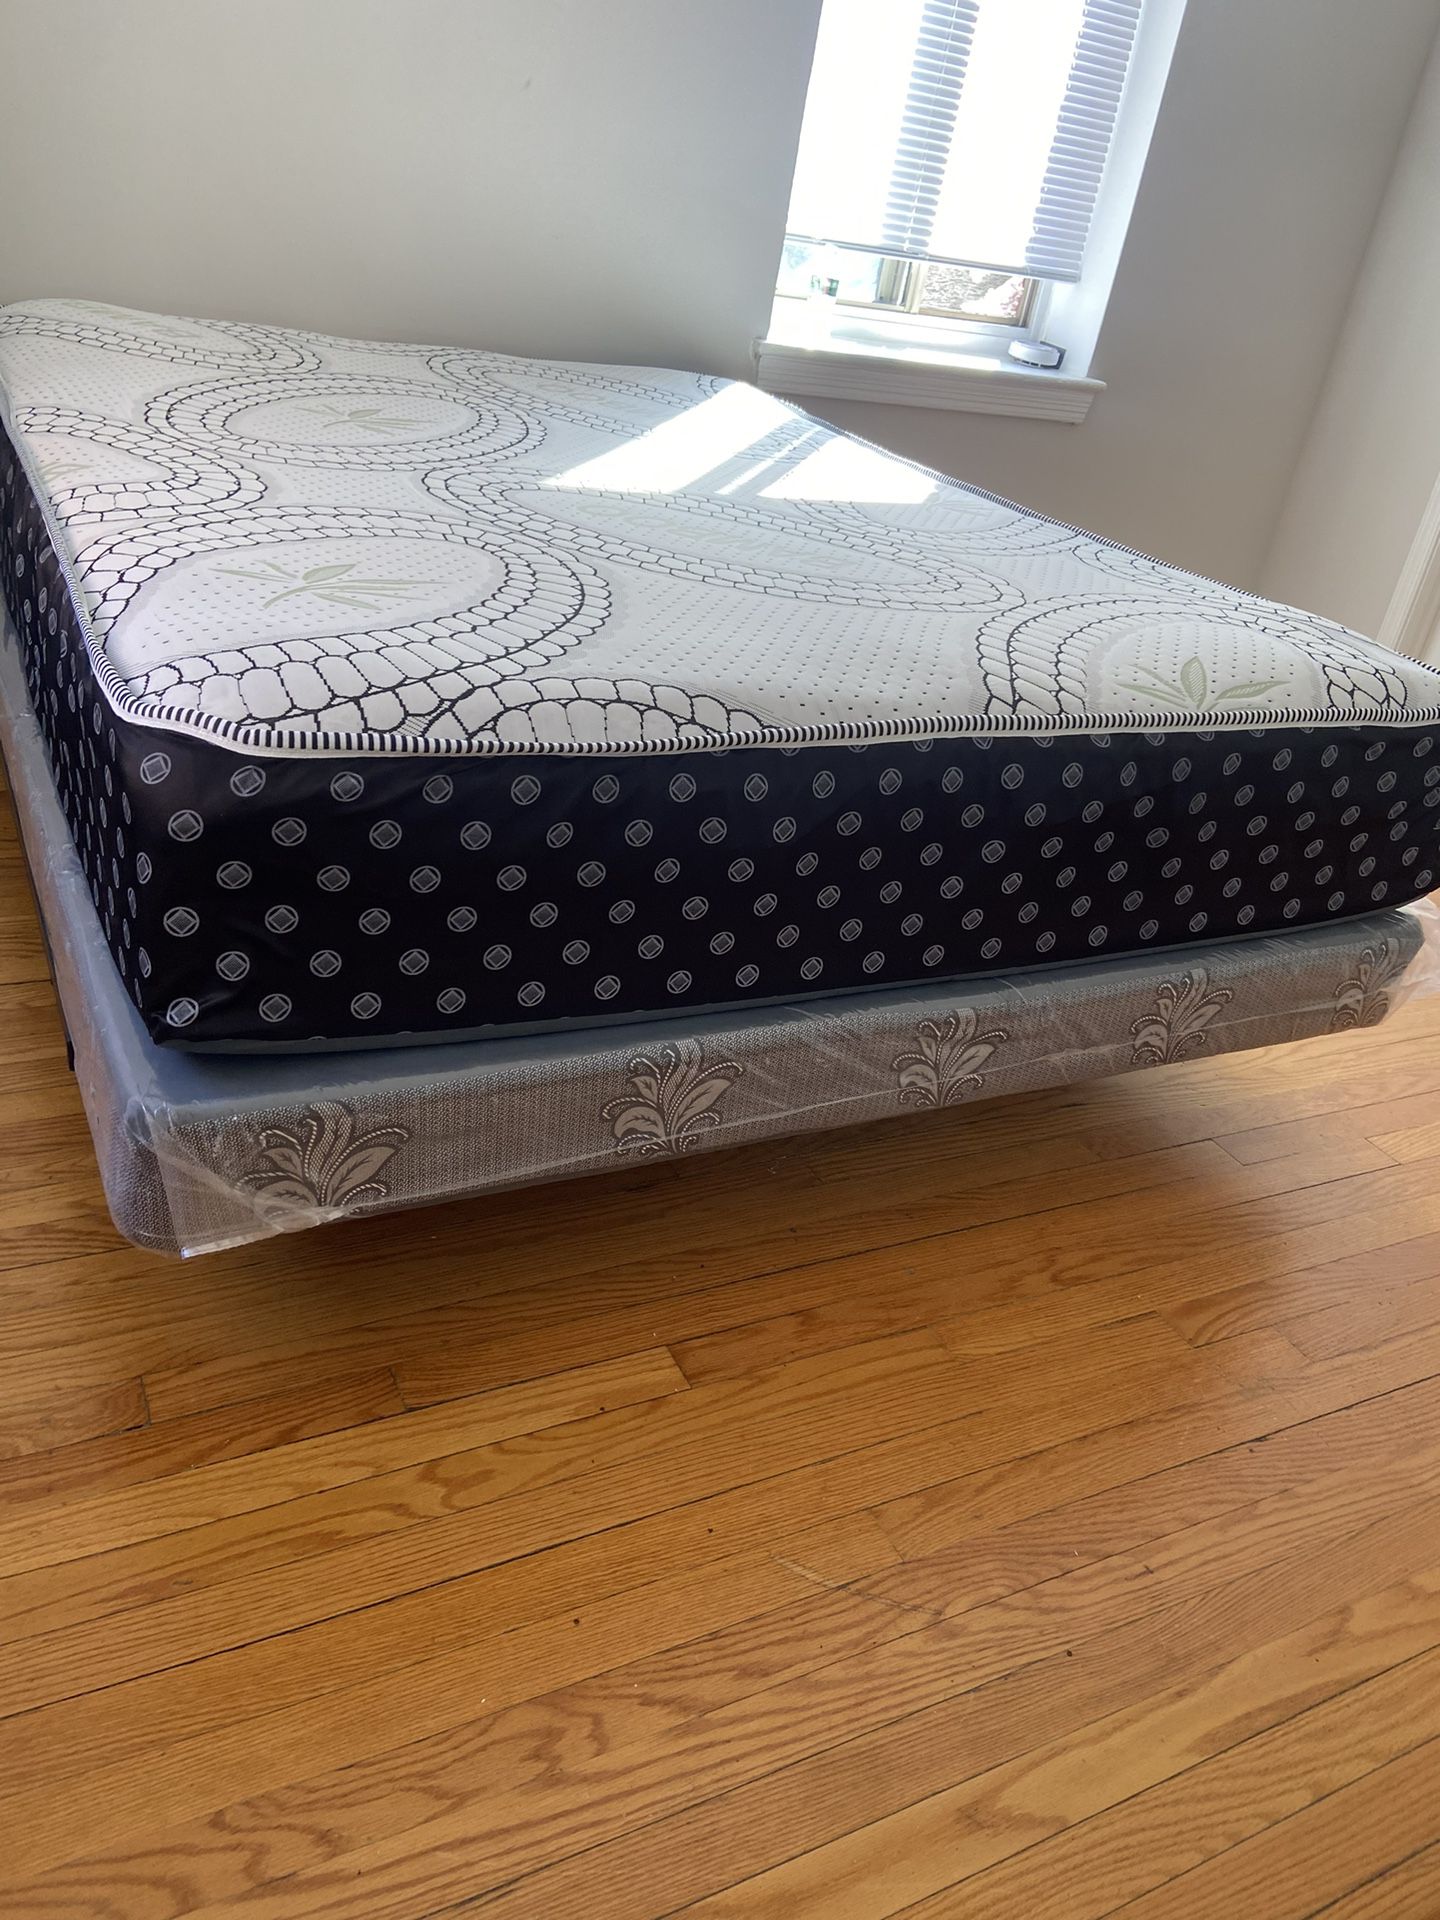 Queen Mattress Come With Rails Frame And Box Spring - Same Day Delivery 